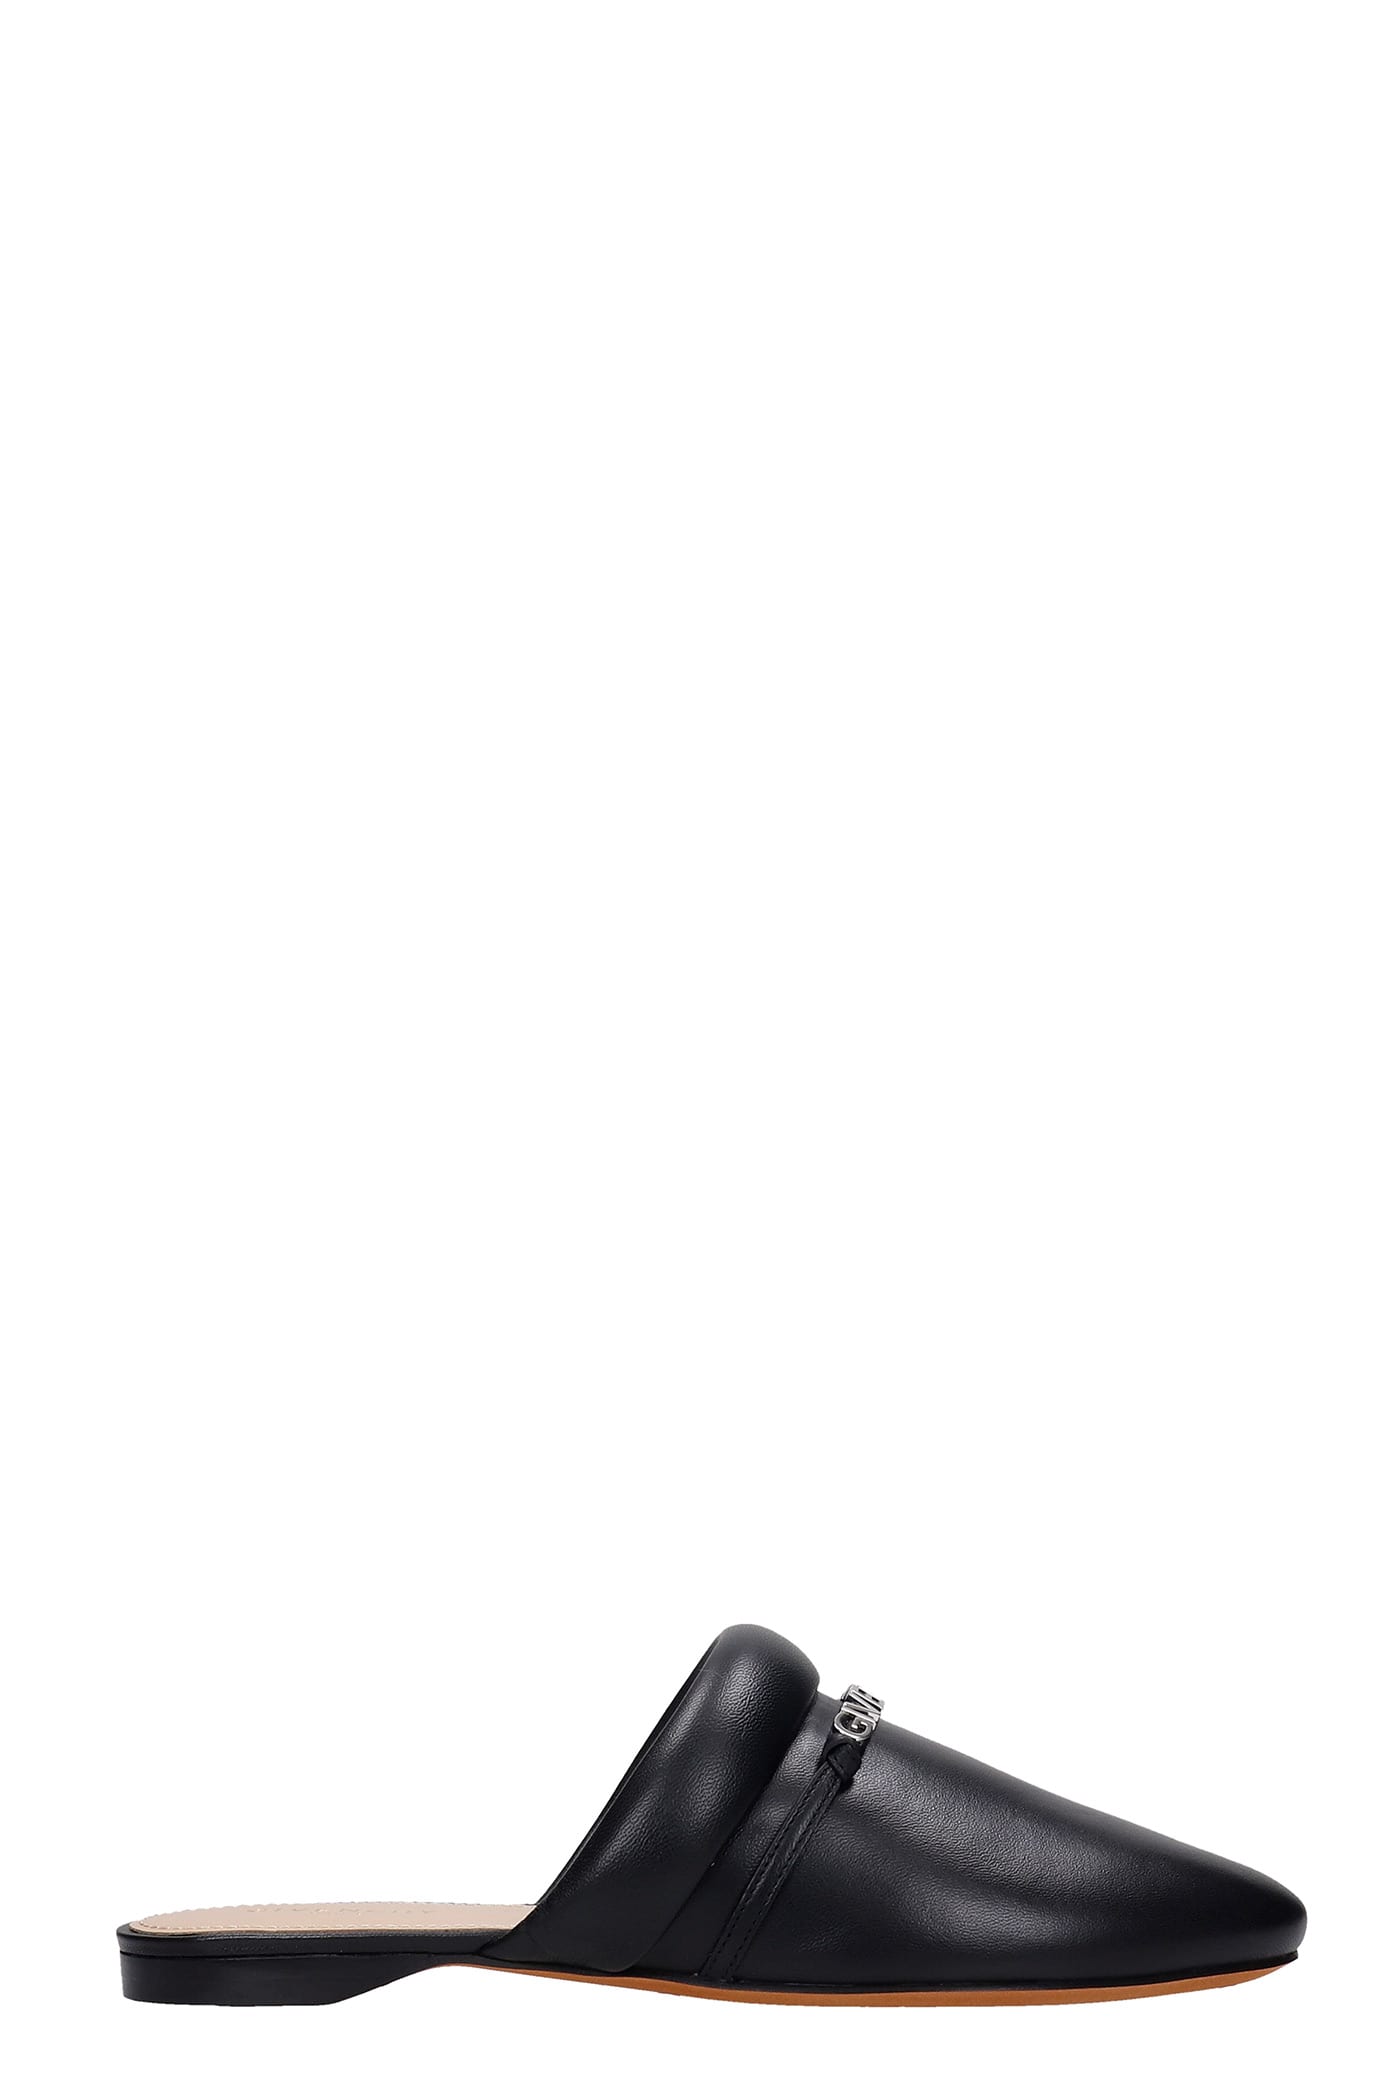 Givenchy Elba Loafers In Black Leather